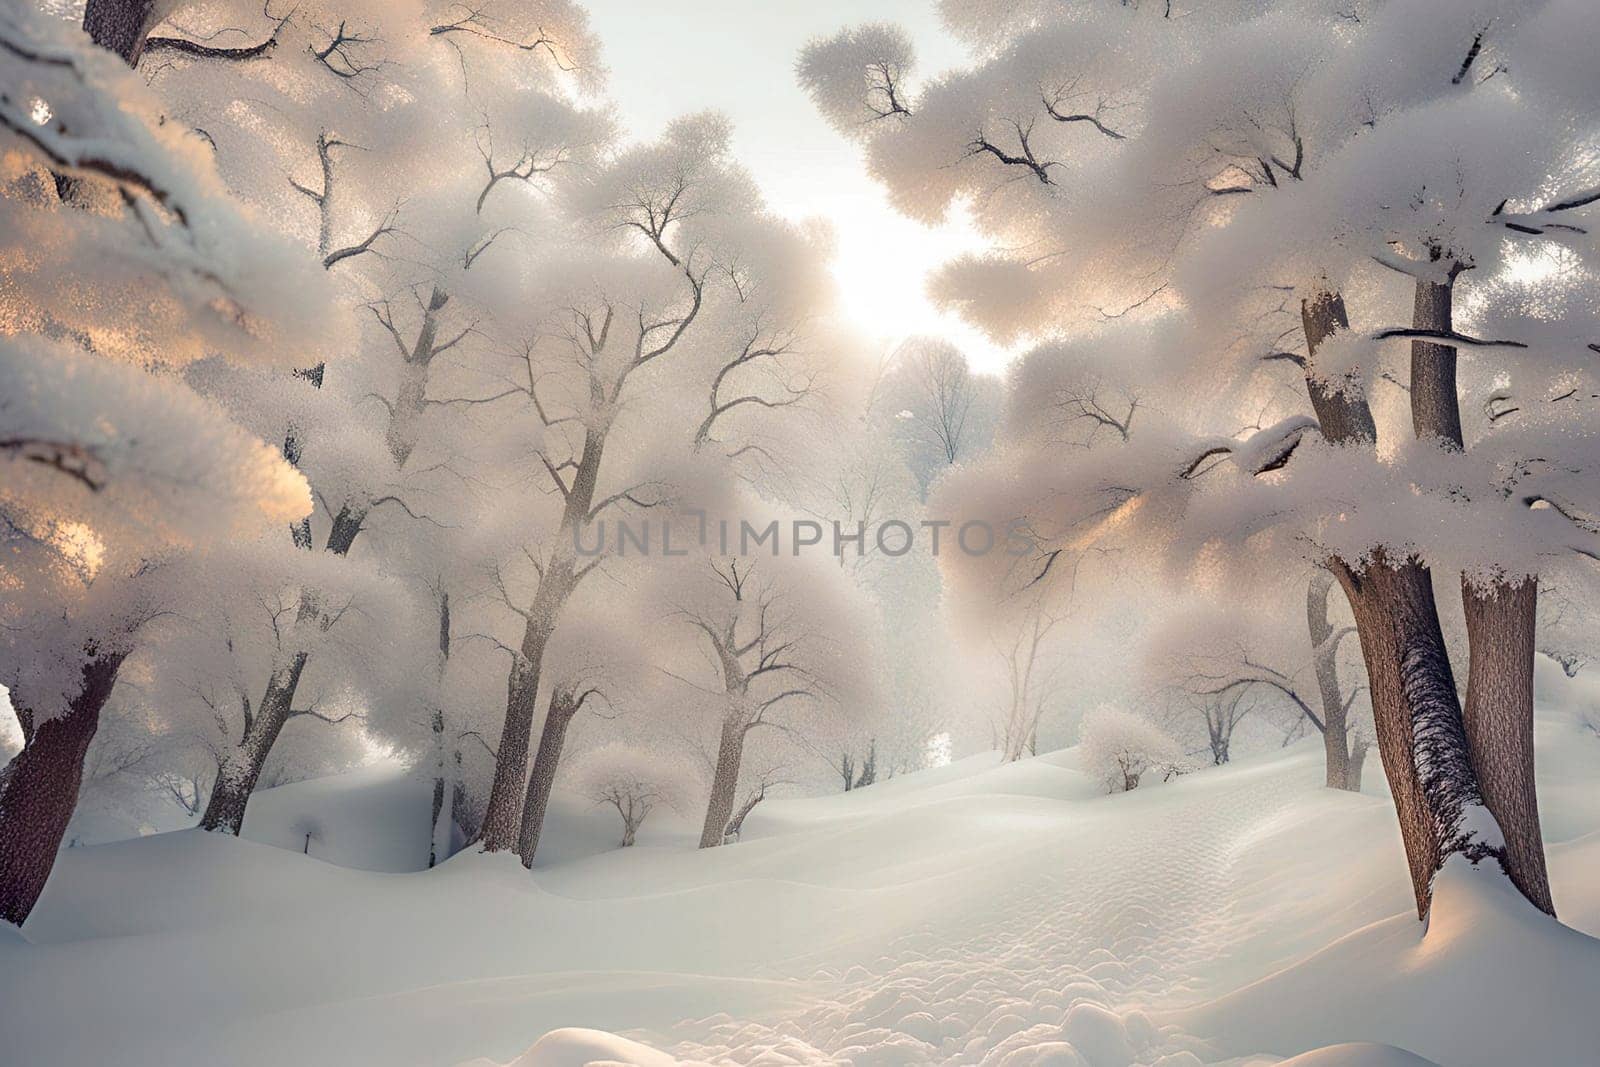 Beautiful winter landscape with snowy trees. Winter landscape with trees covered with snowflakes on the background.